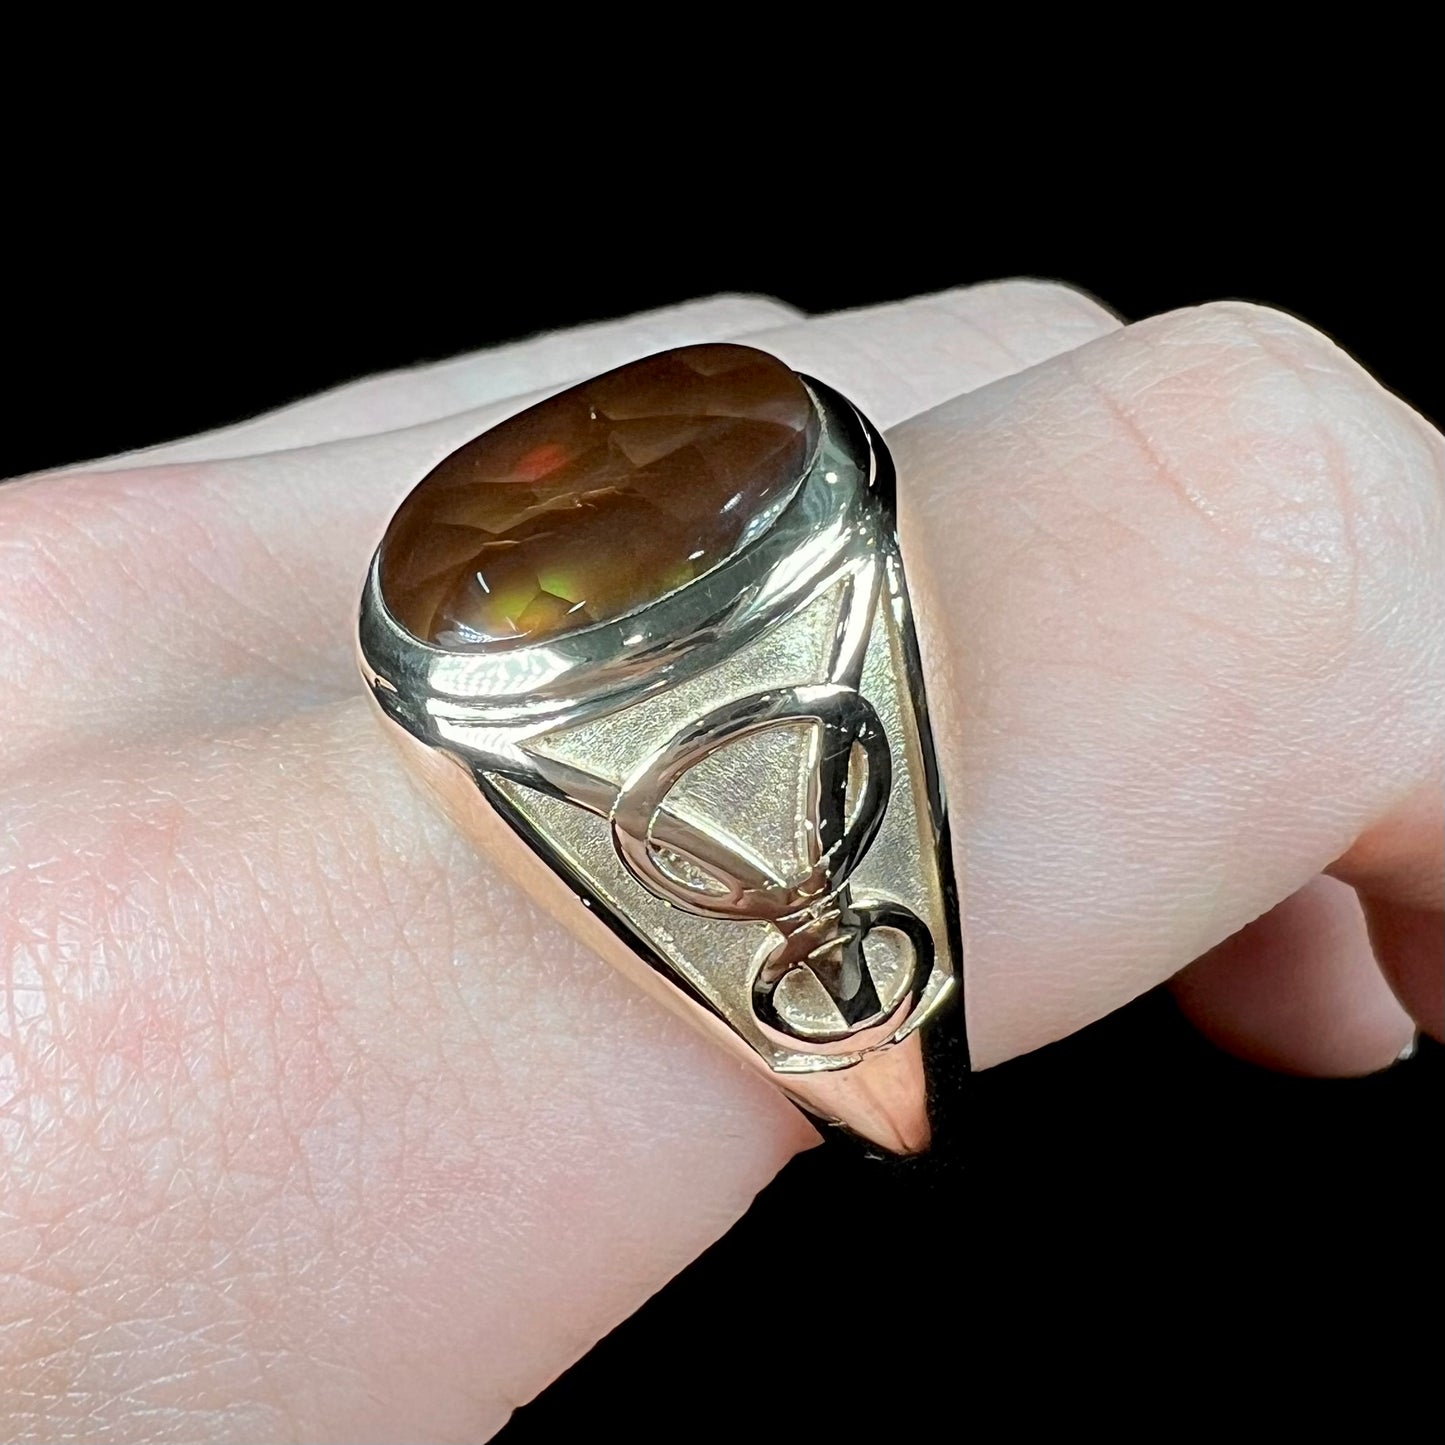 A men's solid yellow gold ring set with a Mexican fire agate stone.  The fire agate has a puple bull's eye pattern.